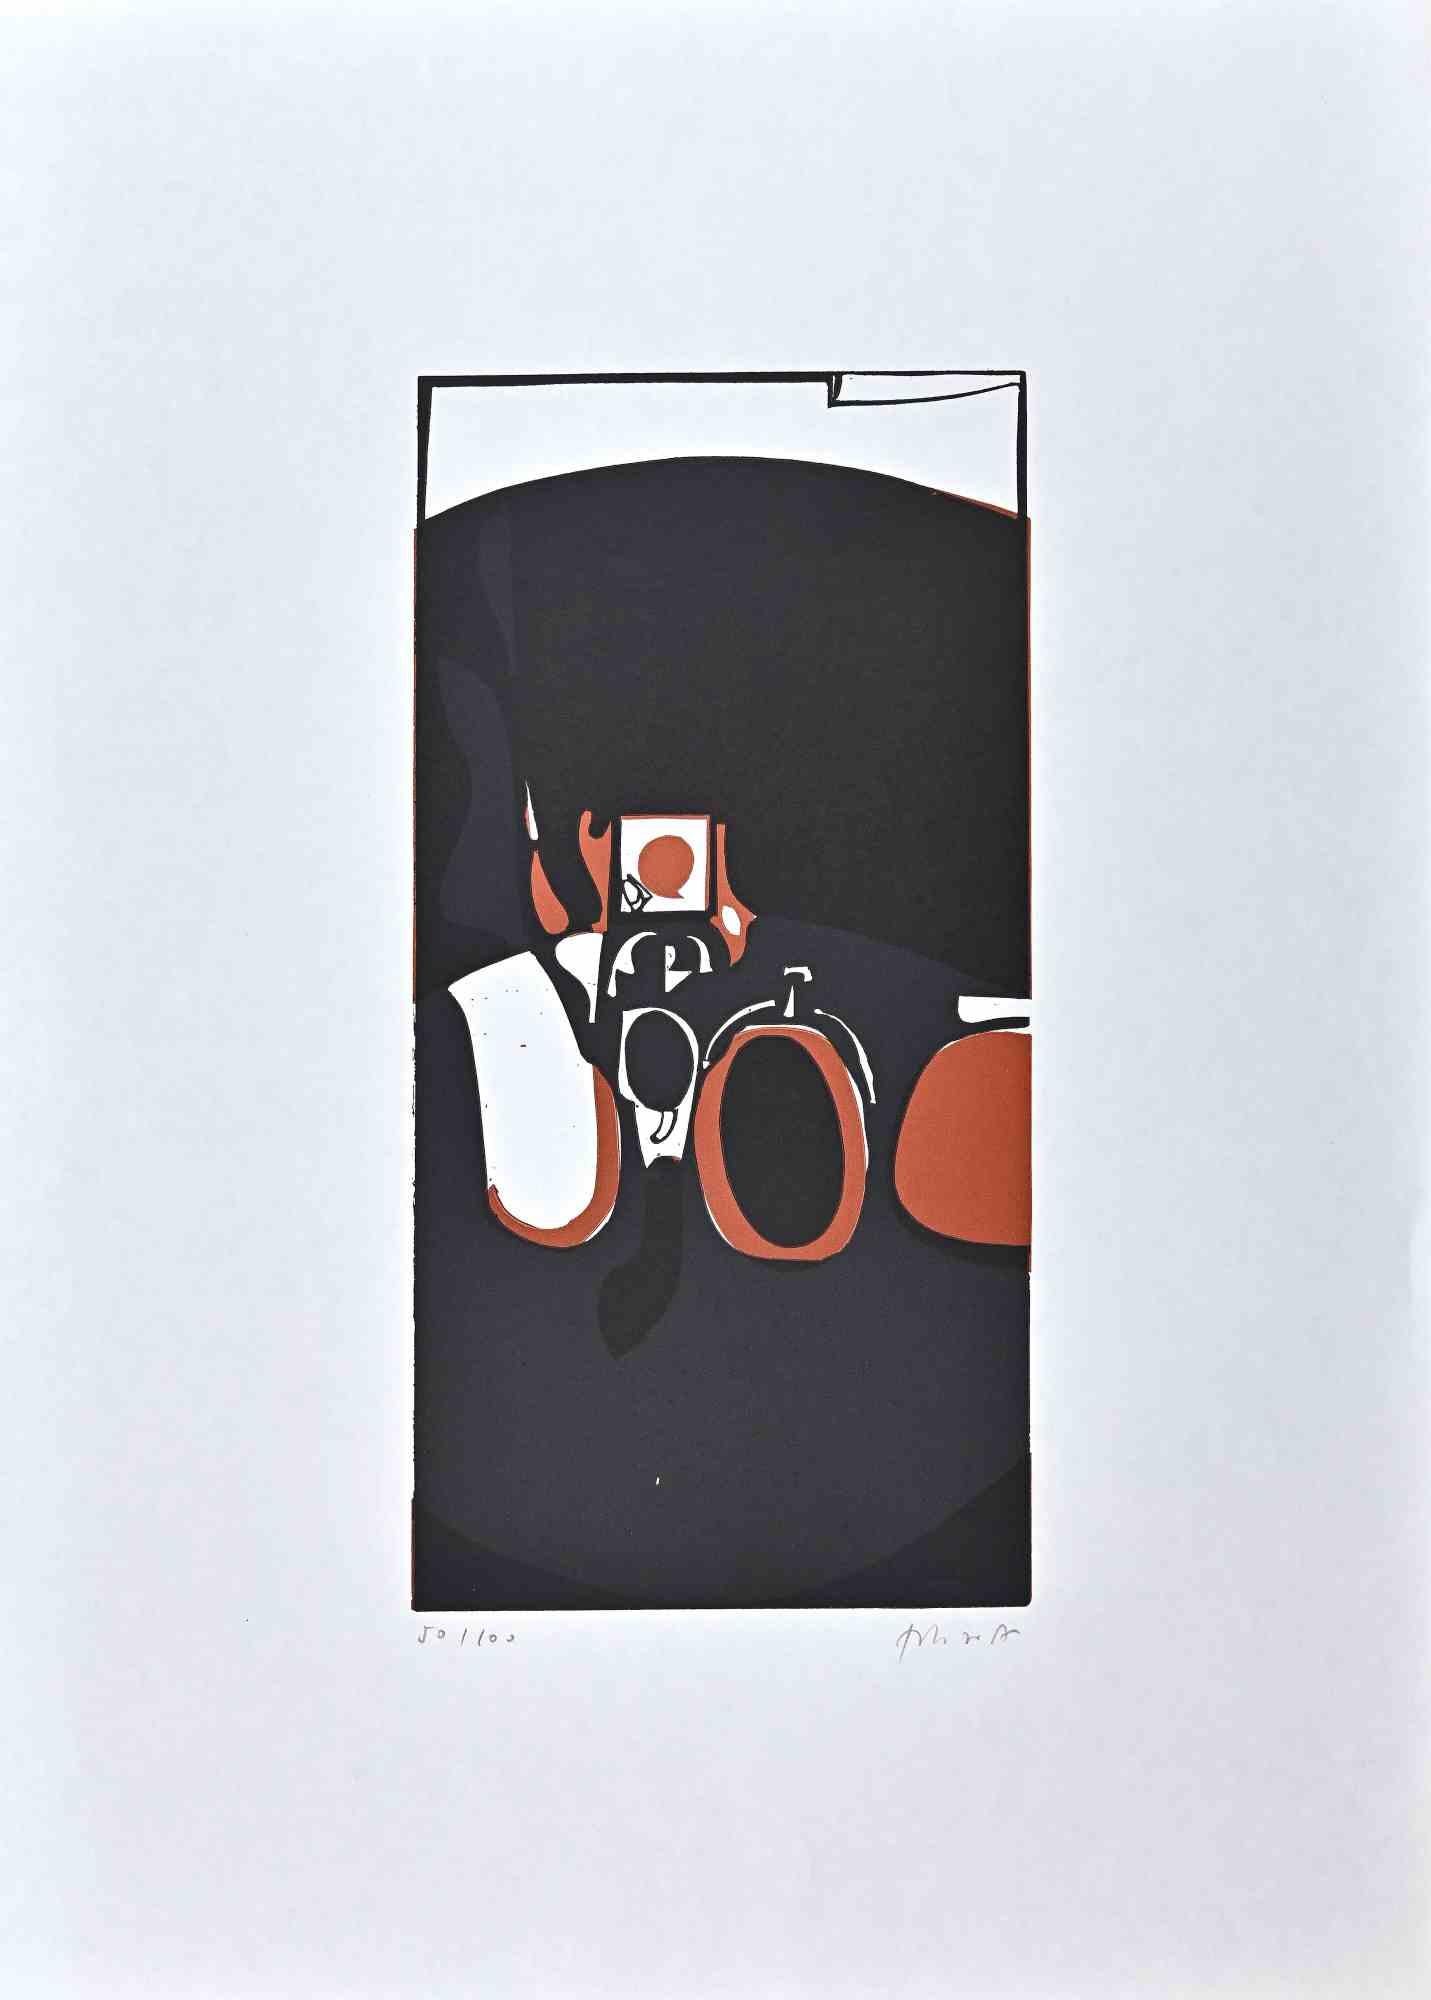 Abstract Composition - Woodcut - 1950s